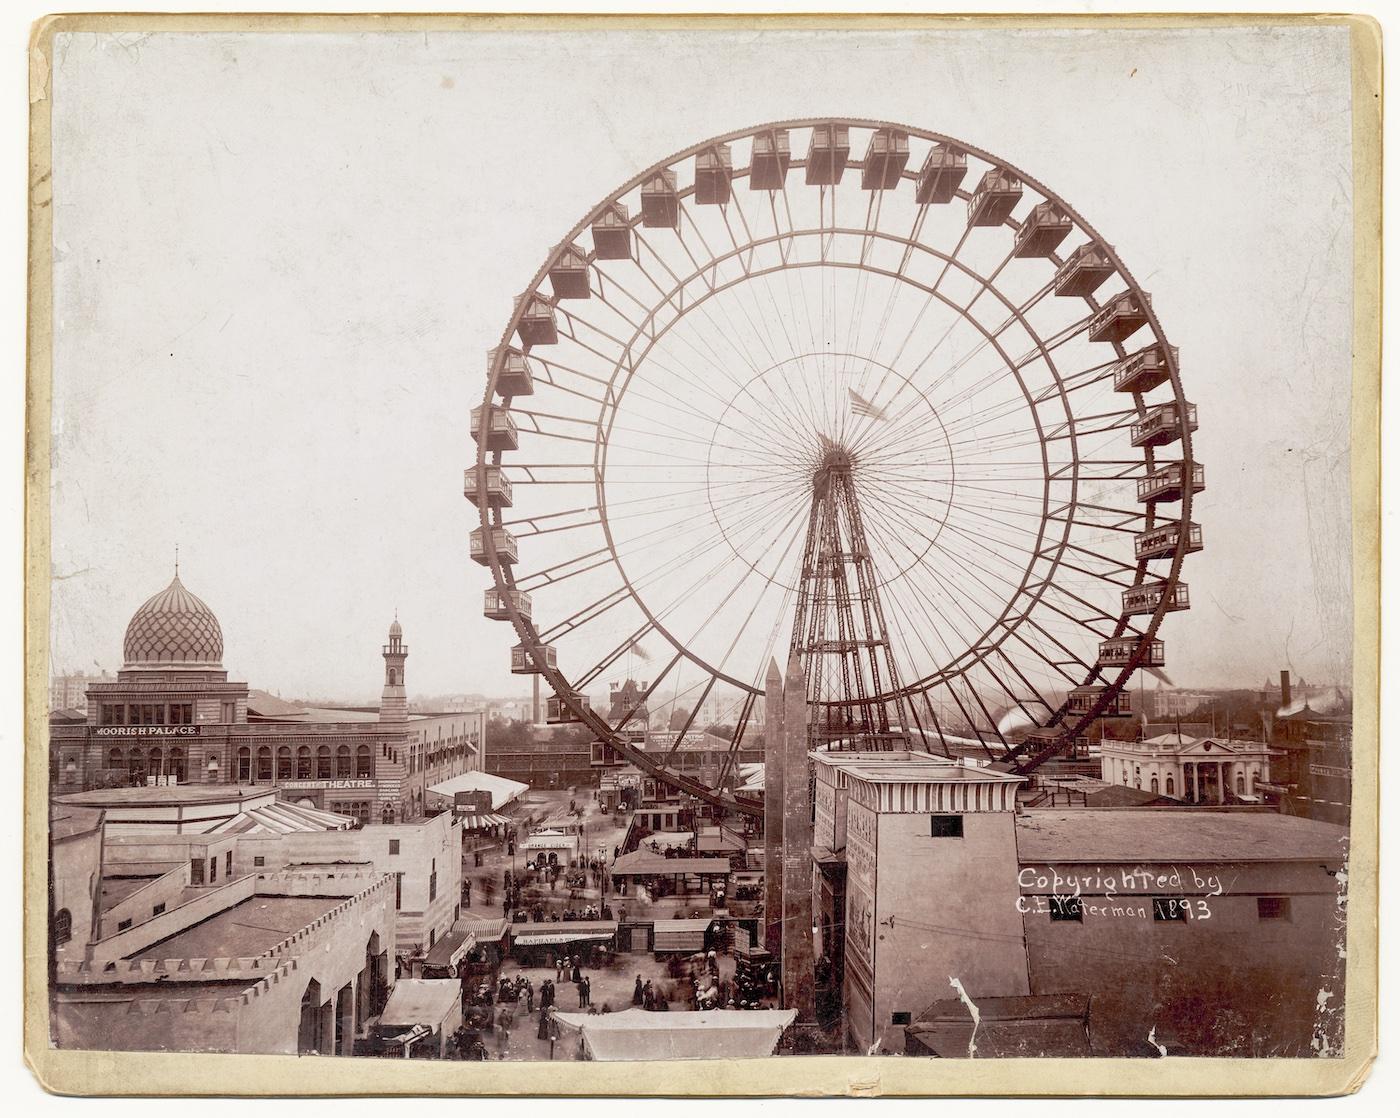 The ferris wheel on the Midway at the World's Columbian Exposition of 1893. Photo: Chicago History Museum, ICHi-002440; C. E. Waterman, photographer